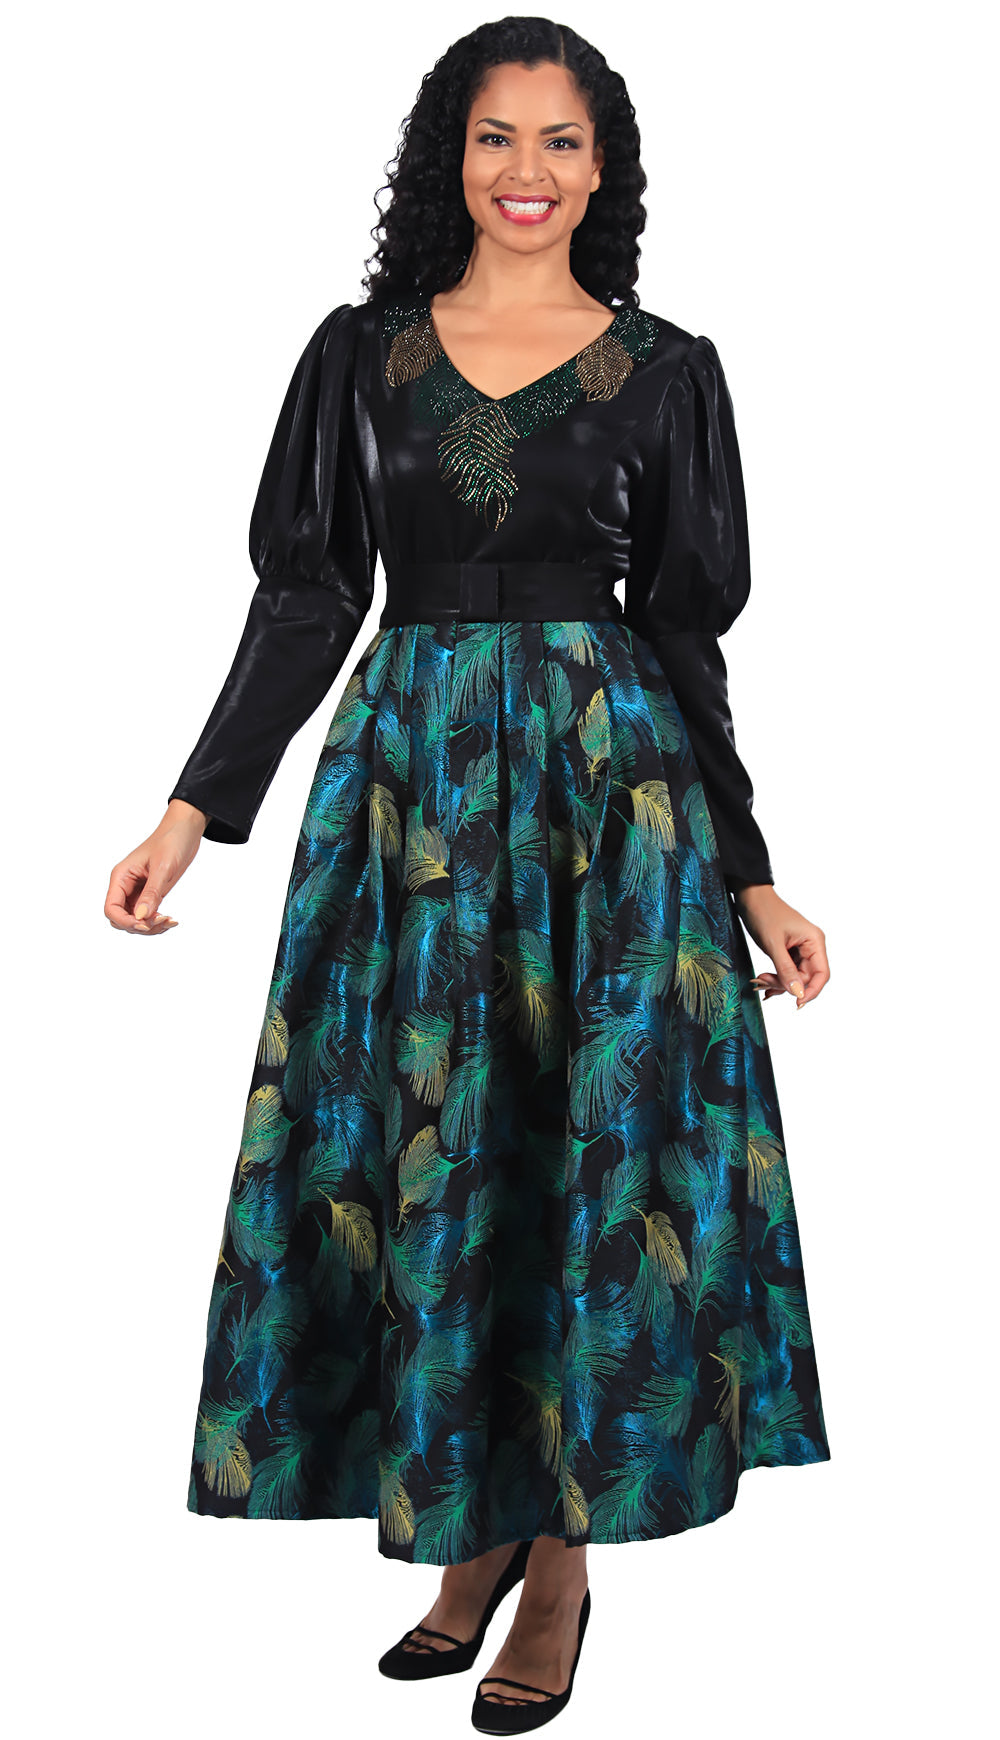 Diana Couture Church Dress 8665C-Black/Green - Church Suits For Less